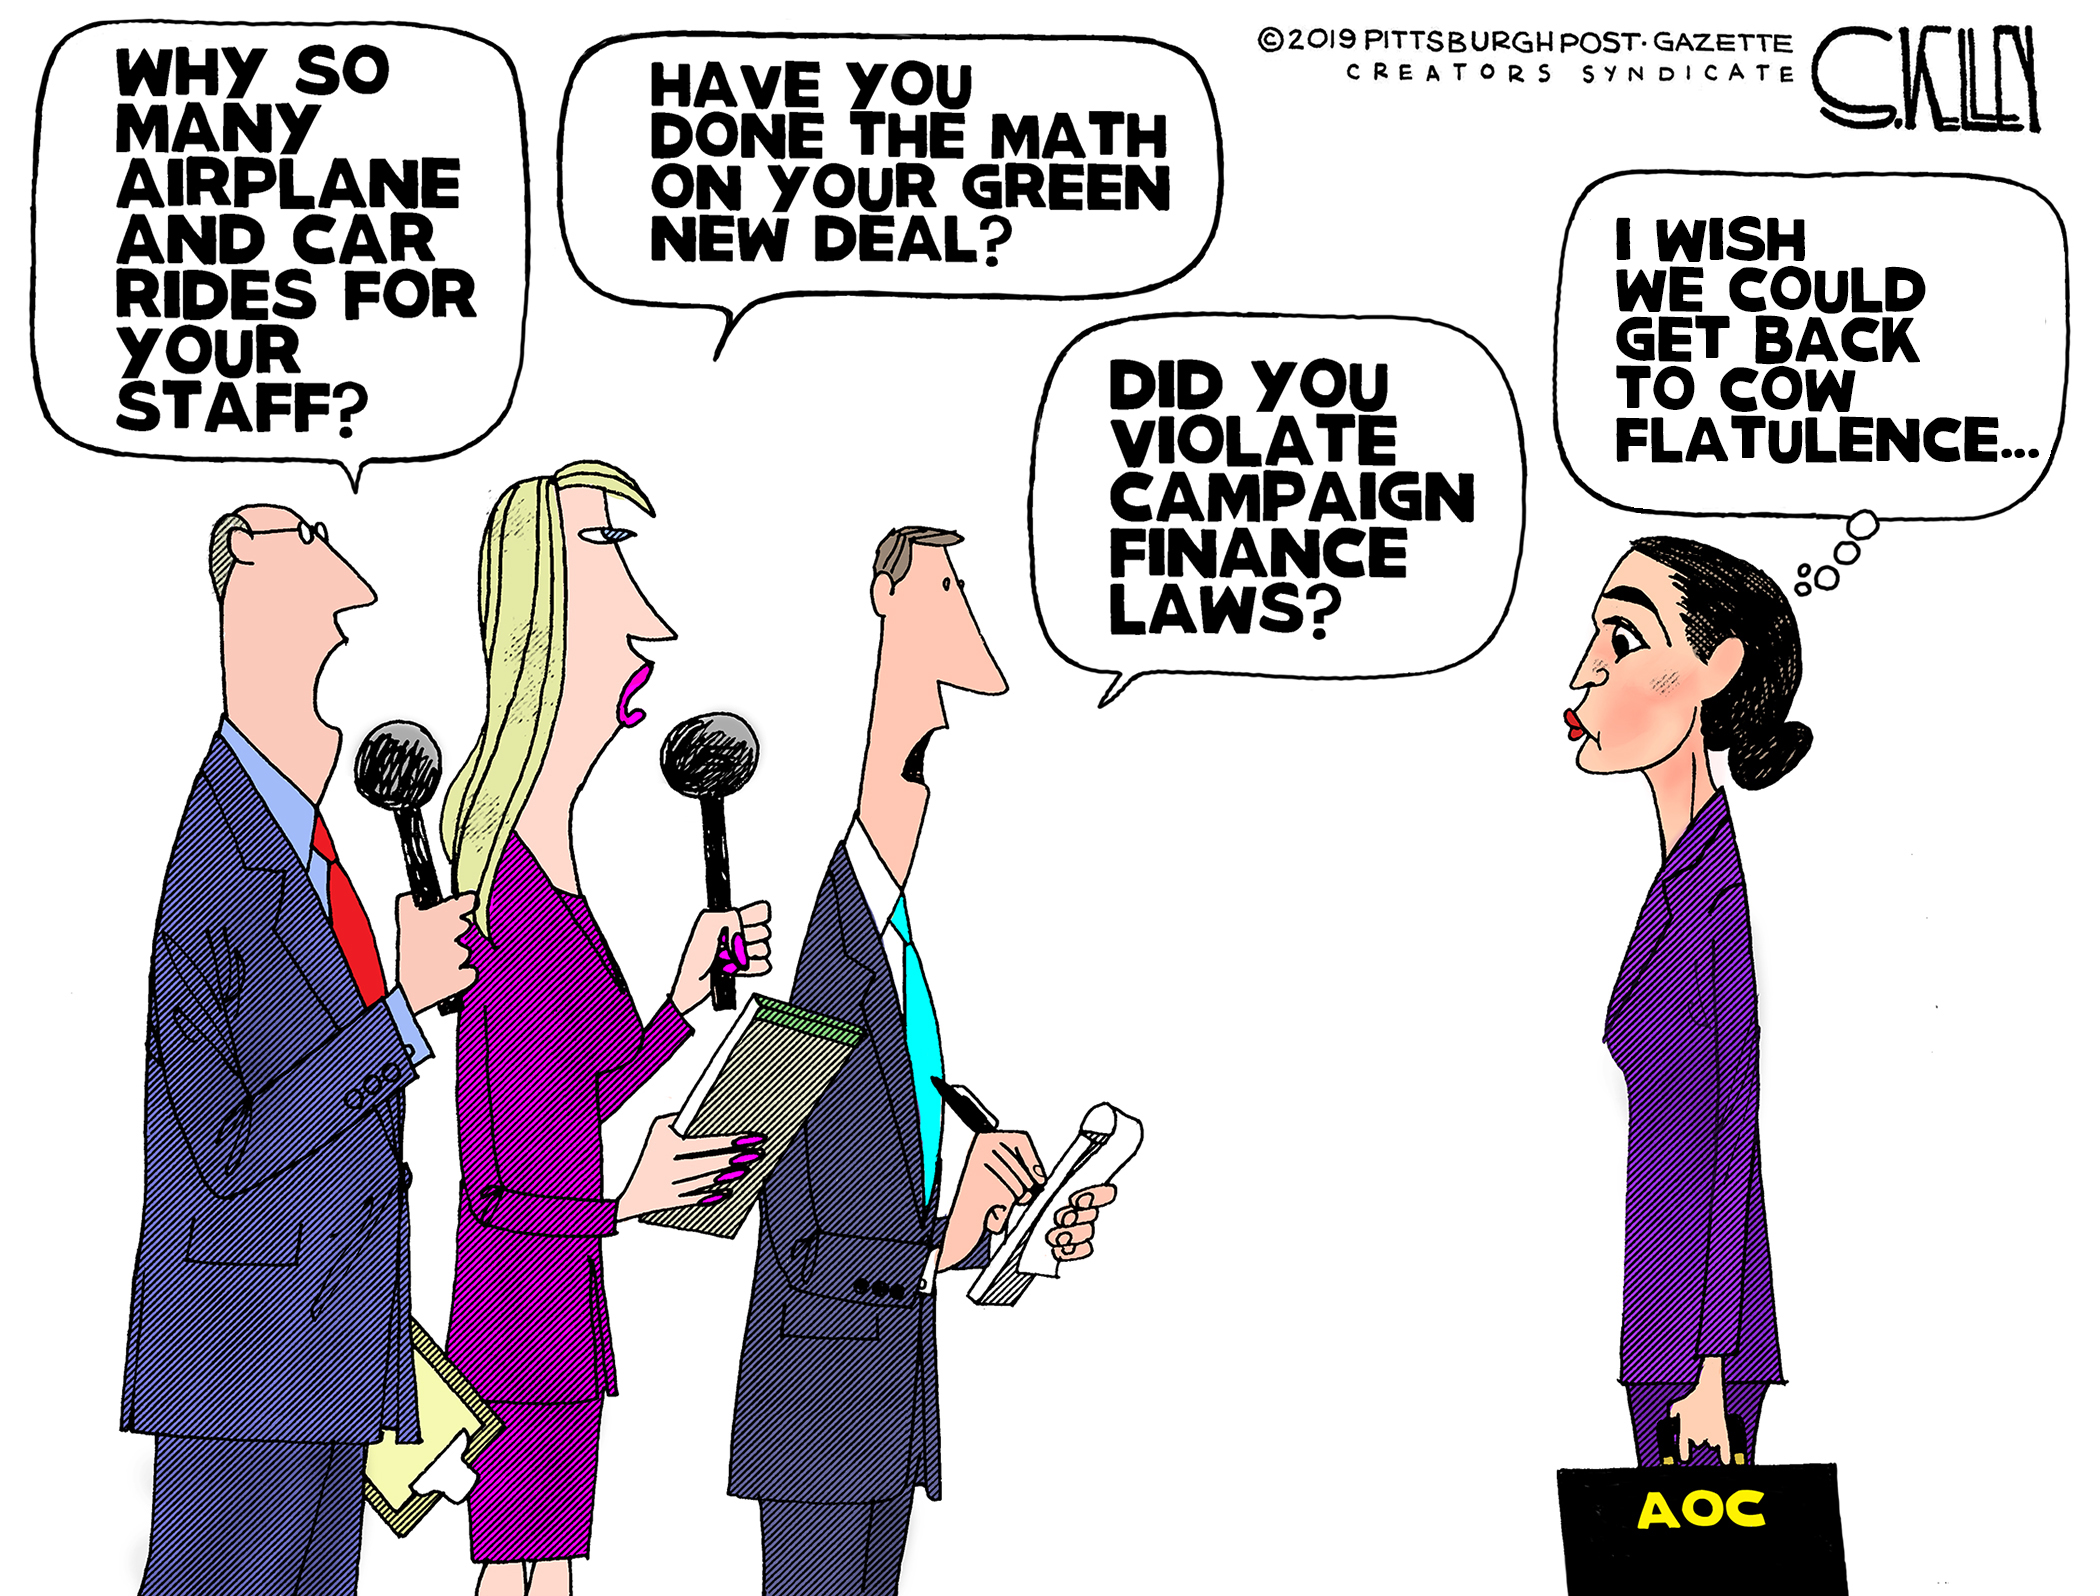 green new deal political cartoon - 2019 Pittsburgh Post Gazette Creators Syndicate Why So Many Airplane And Car Rides For Your Staff? Have You Done The Math On Your Green New Deal? I Wish We Could Get Back To Cow Flatulence... Did You Violate Campaign Fin